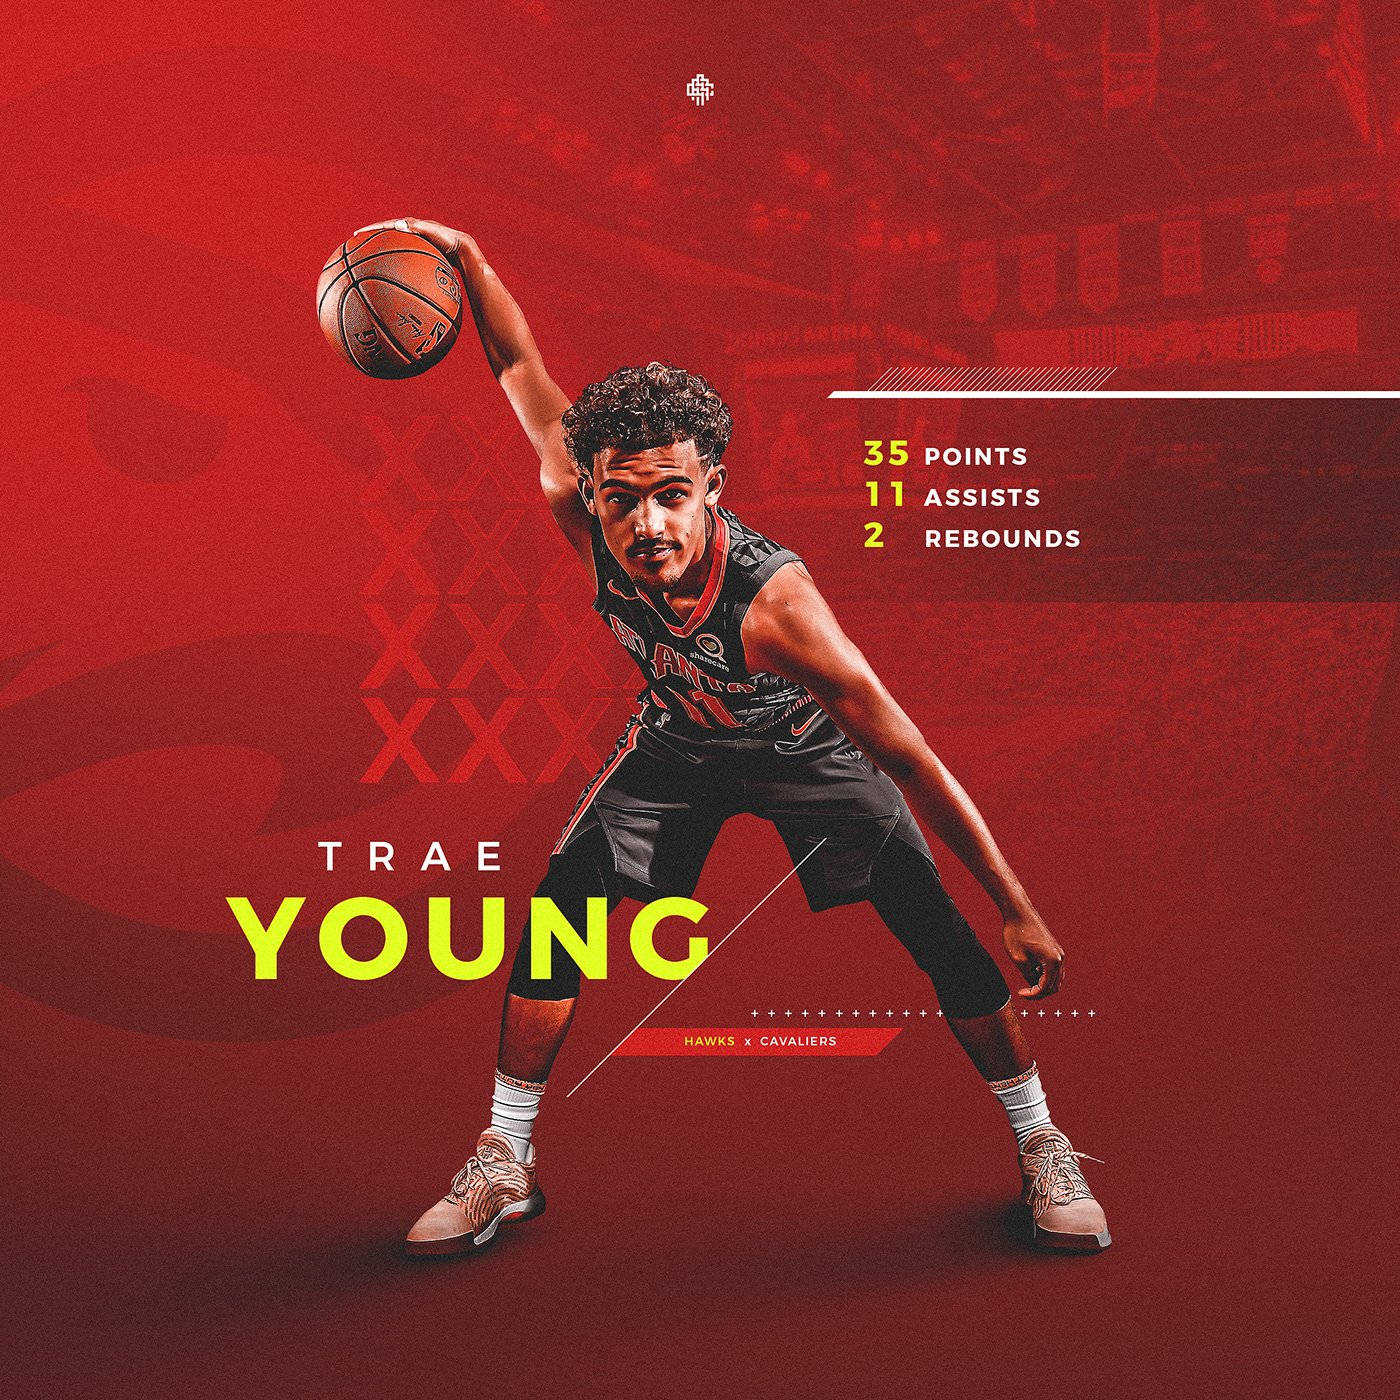 Trae Young Hawks Profile